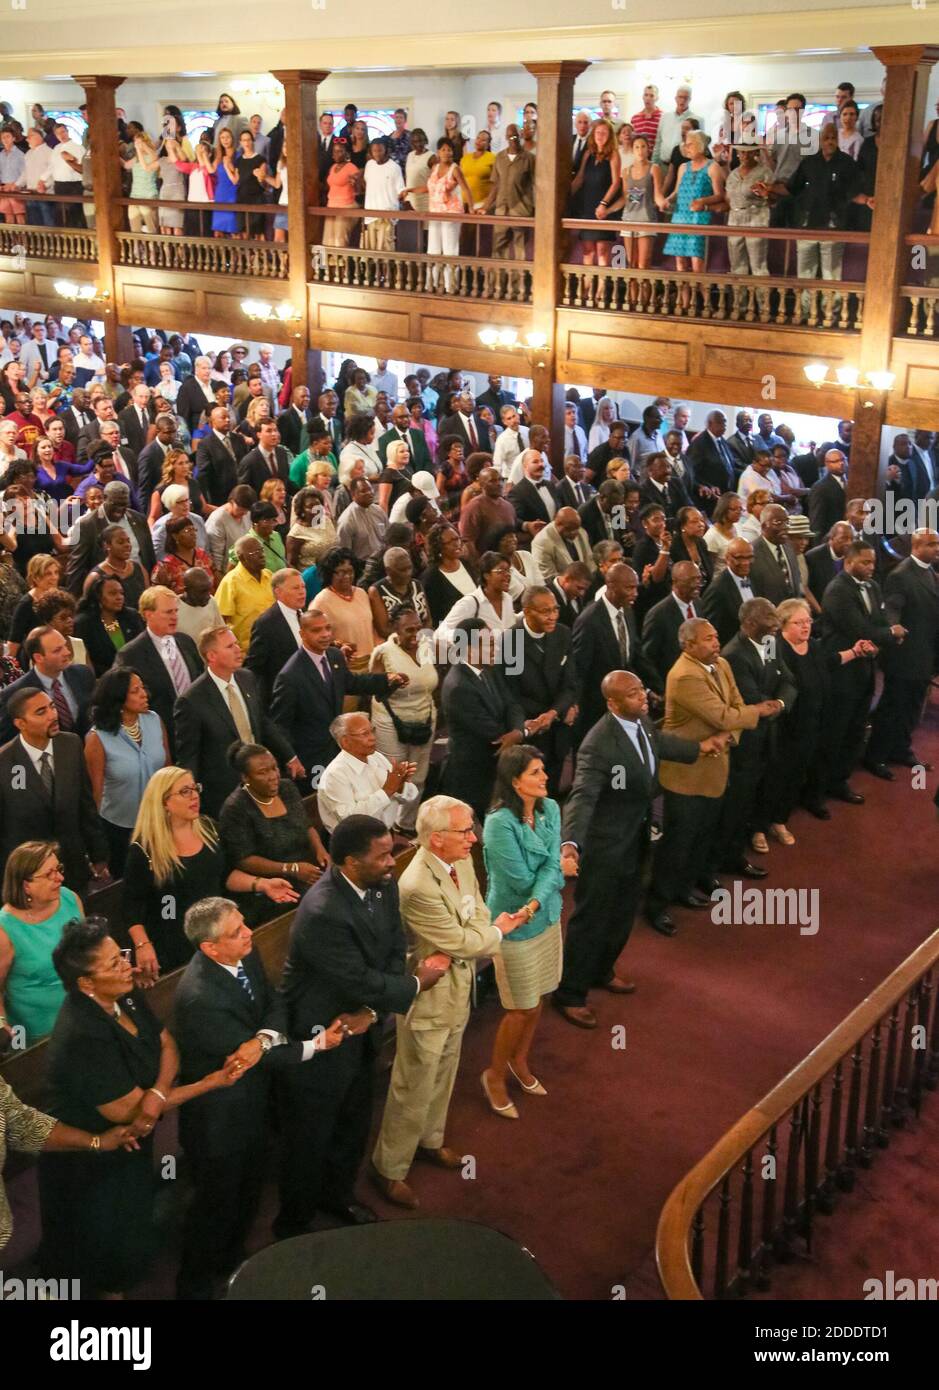 NO FILM, NO VIDEO, NO TV, NO DOCUMENTARY - A prayer vigil is held at Morris Brown AME Church for the nine people who were killed by a gunman in Emanuel AME Church in Charleston, SC, USA. Photo by Tim Dominick/The State/TNS/ABACAPRESS.COM Stock Photo